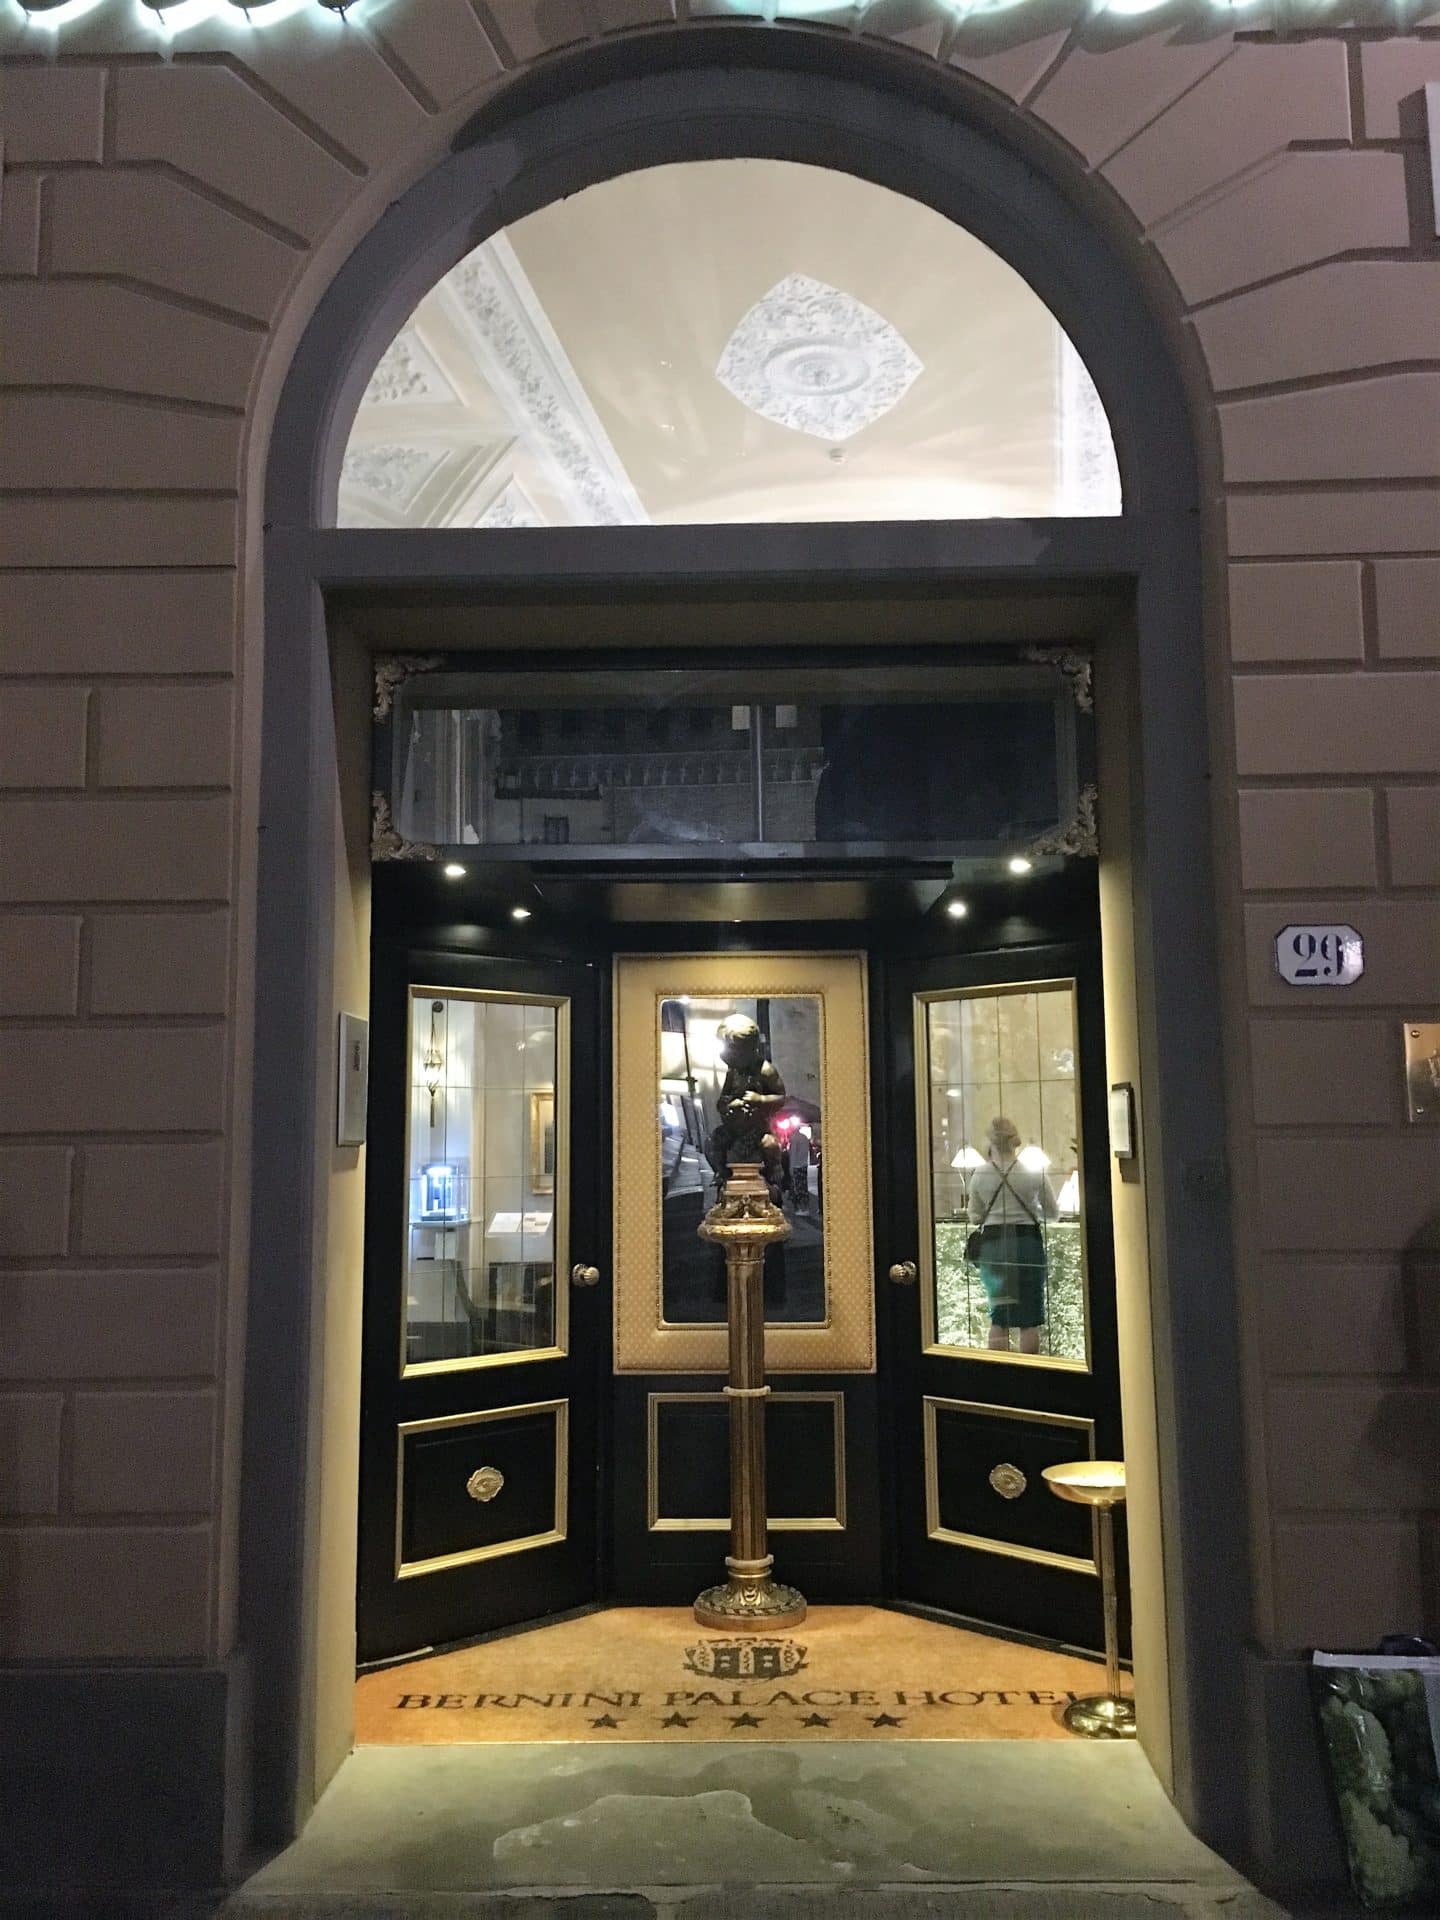 The Opulent Bernini Palace Hotel front door which is dark and split into three walkways. The door is glass and set into the beige stone work of the building. There is a tall flower vase in front of the door, the lights are shininhg through the door